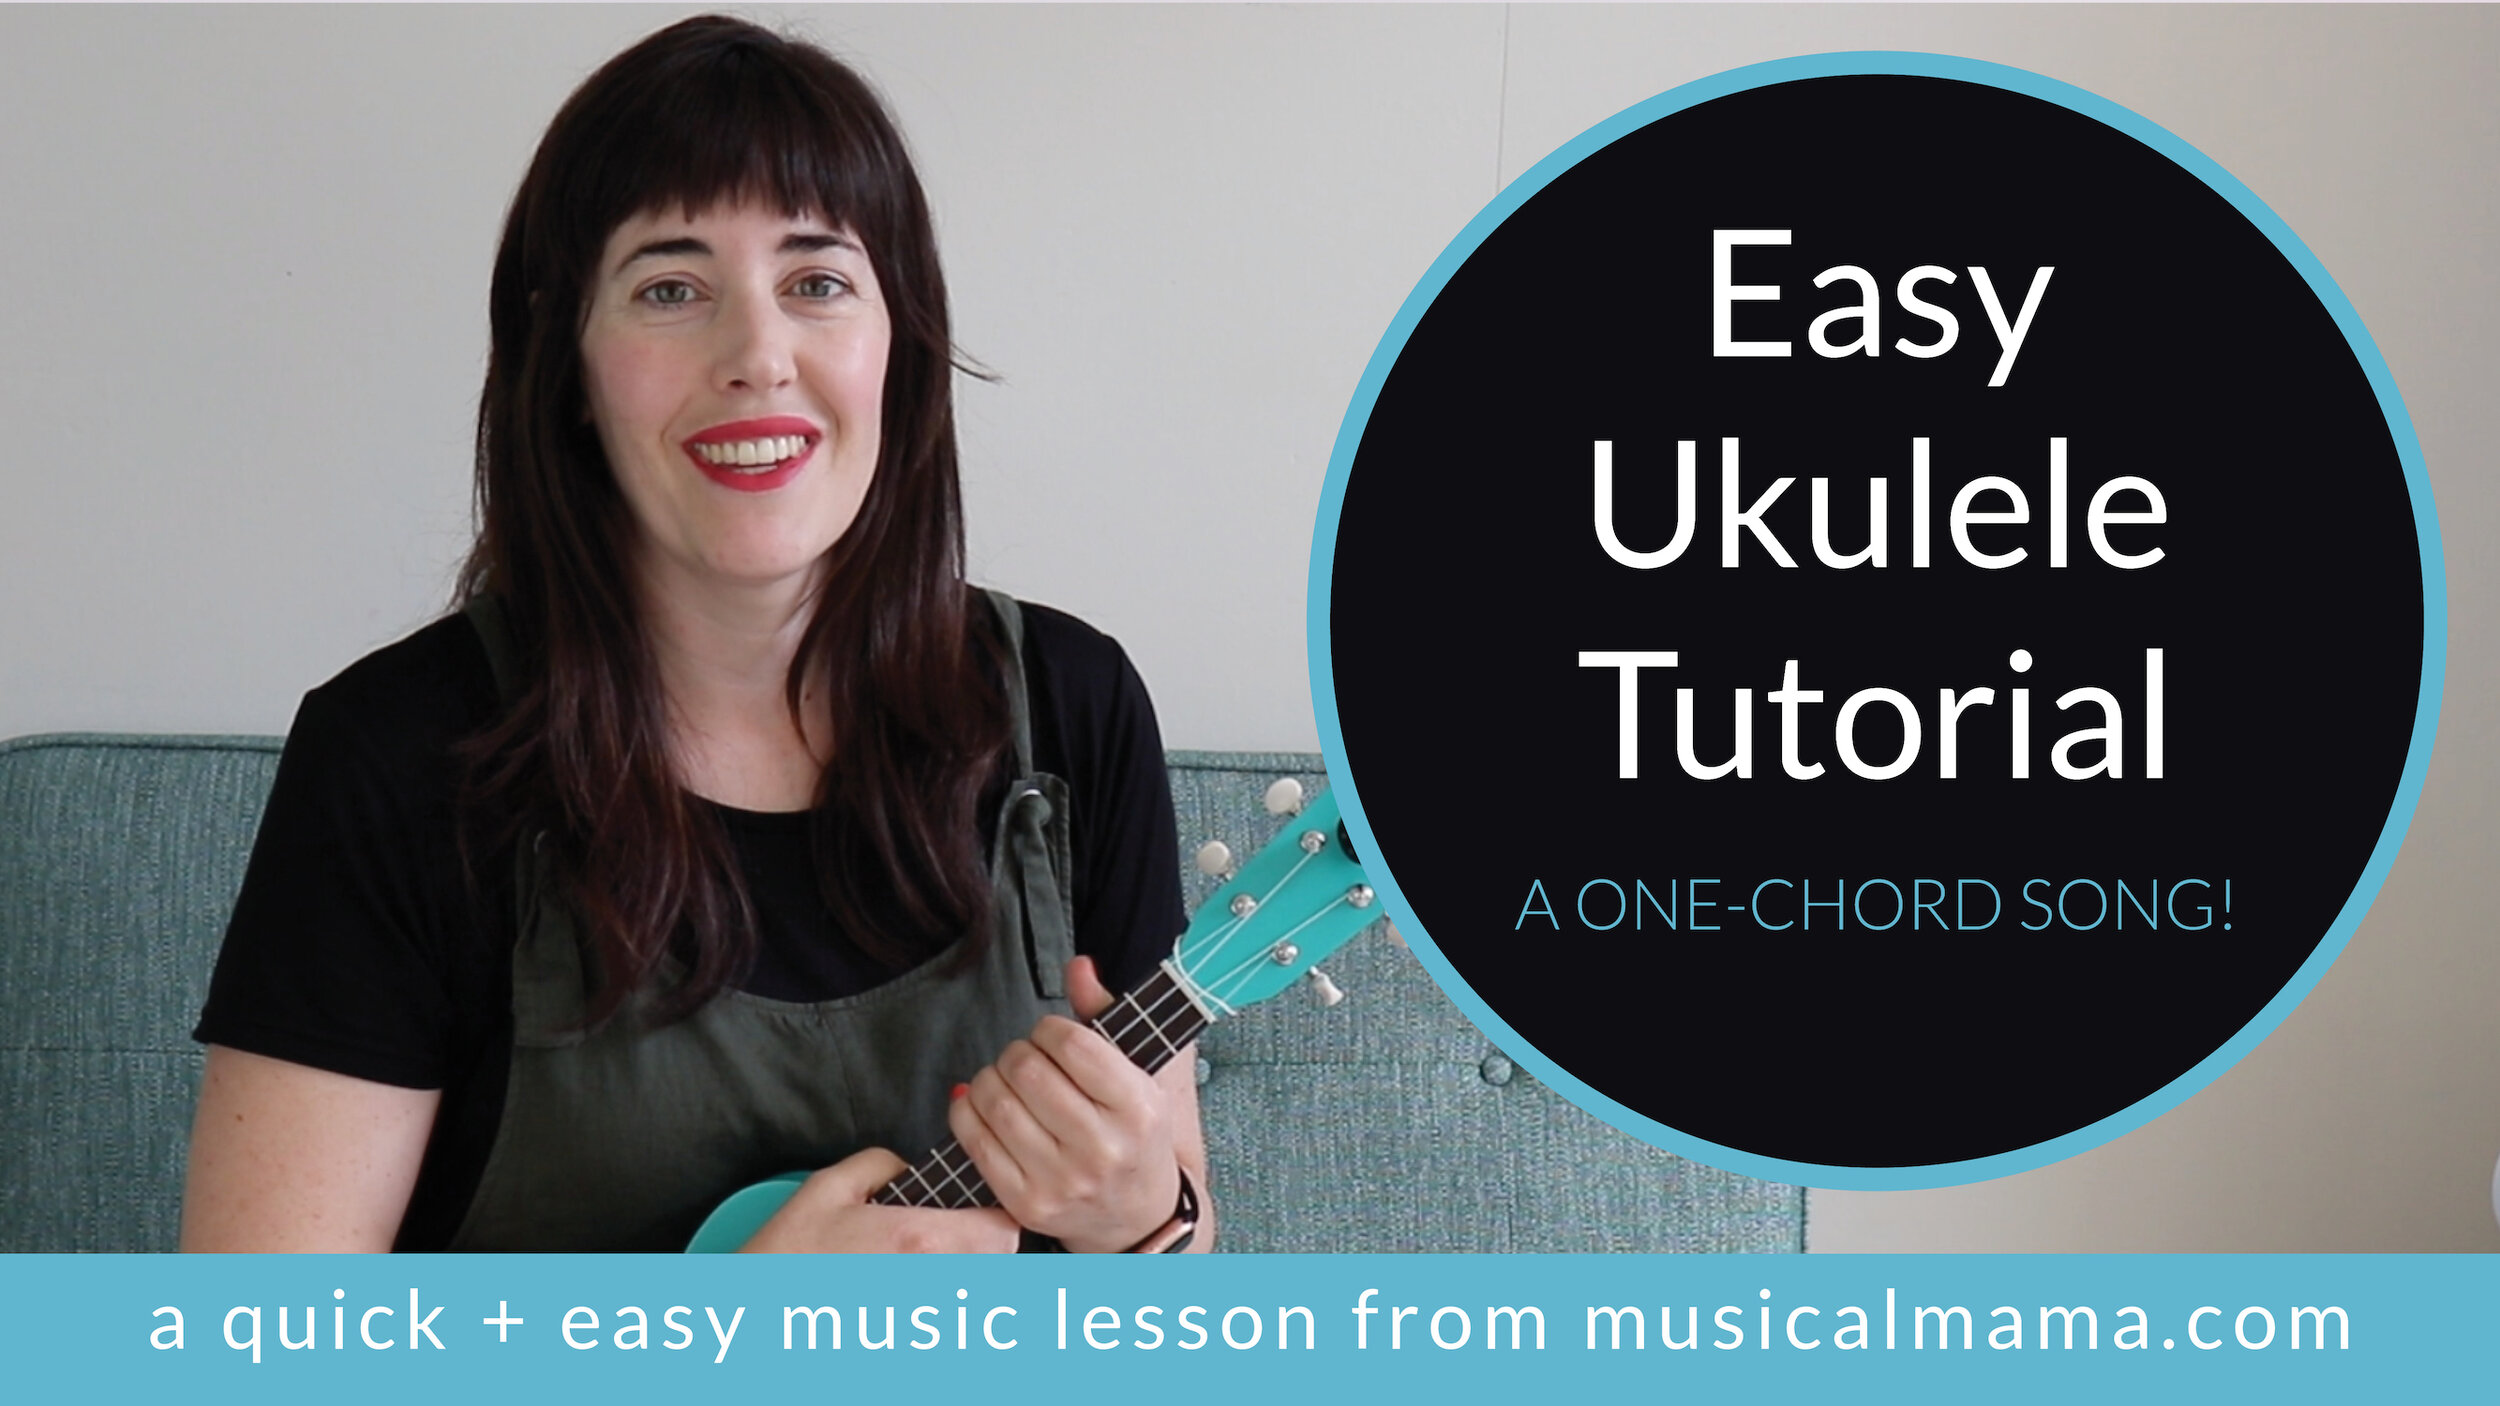 Practice New Strums With This One-Chord Song